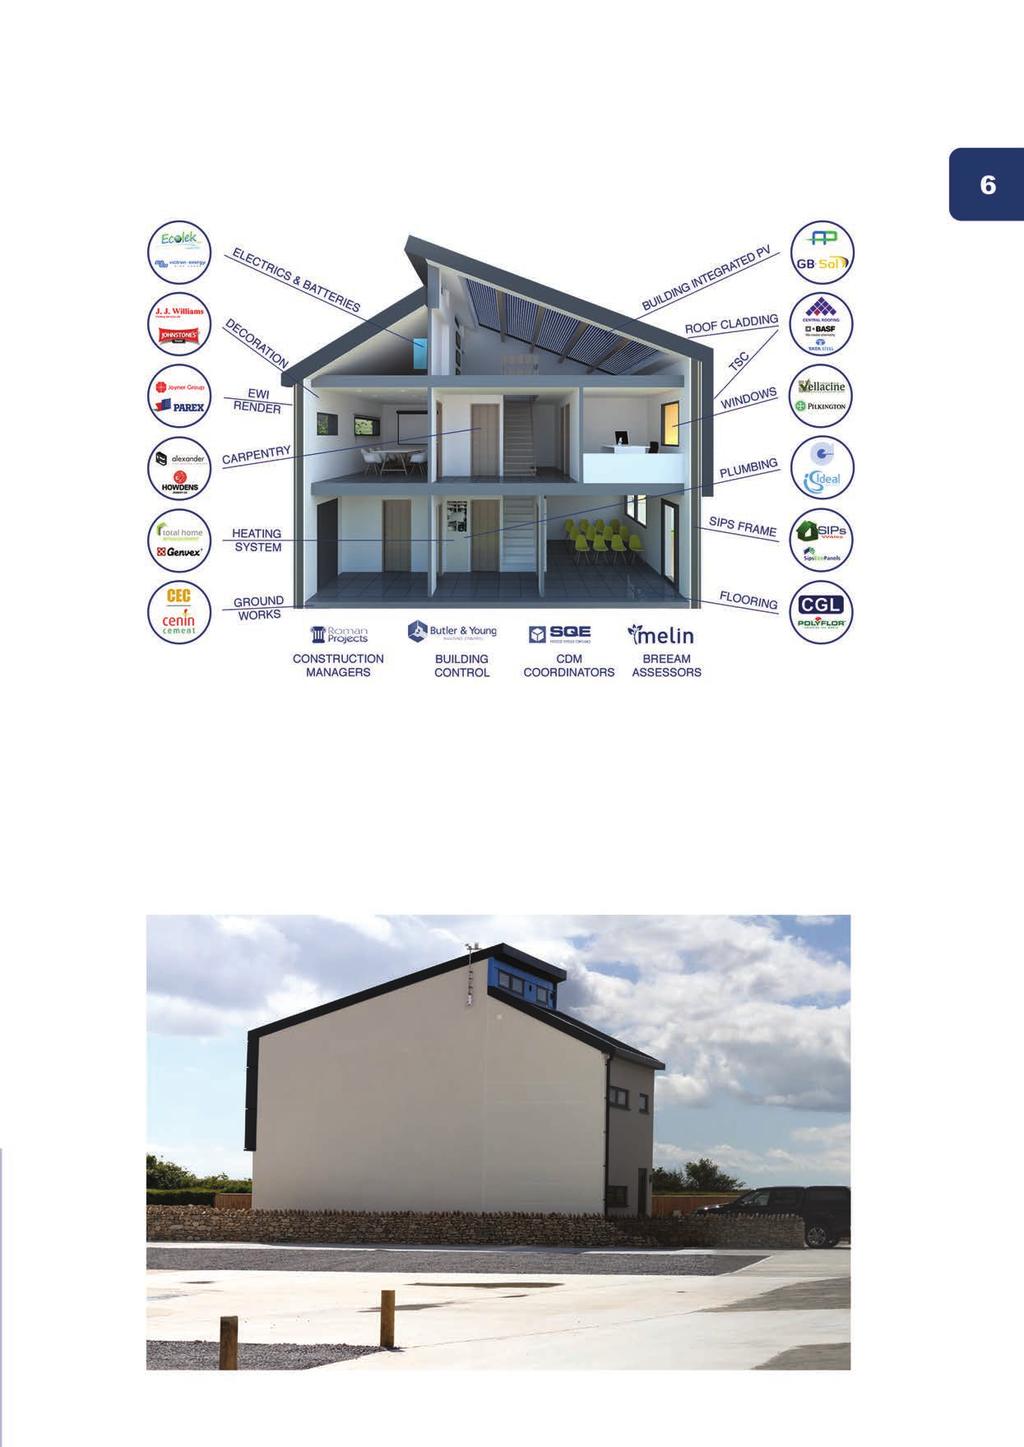 SUPPLY CHAIN The components of the building have been sourced, as far as reasonably practicable, from Welsh manufacturers and installers, and the house will be used as a demonstration of advanced